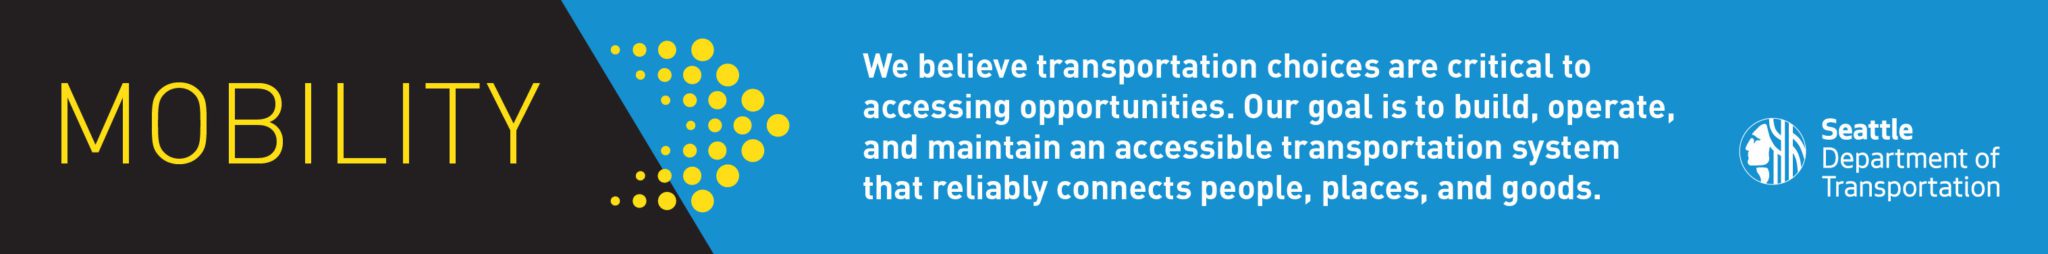 Mobility is one of SDOT's core values and goals.